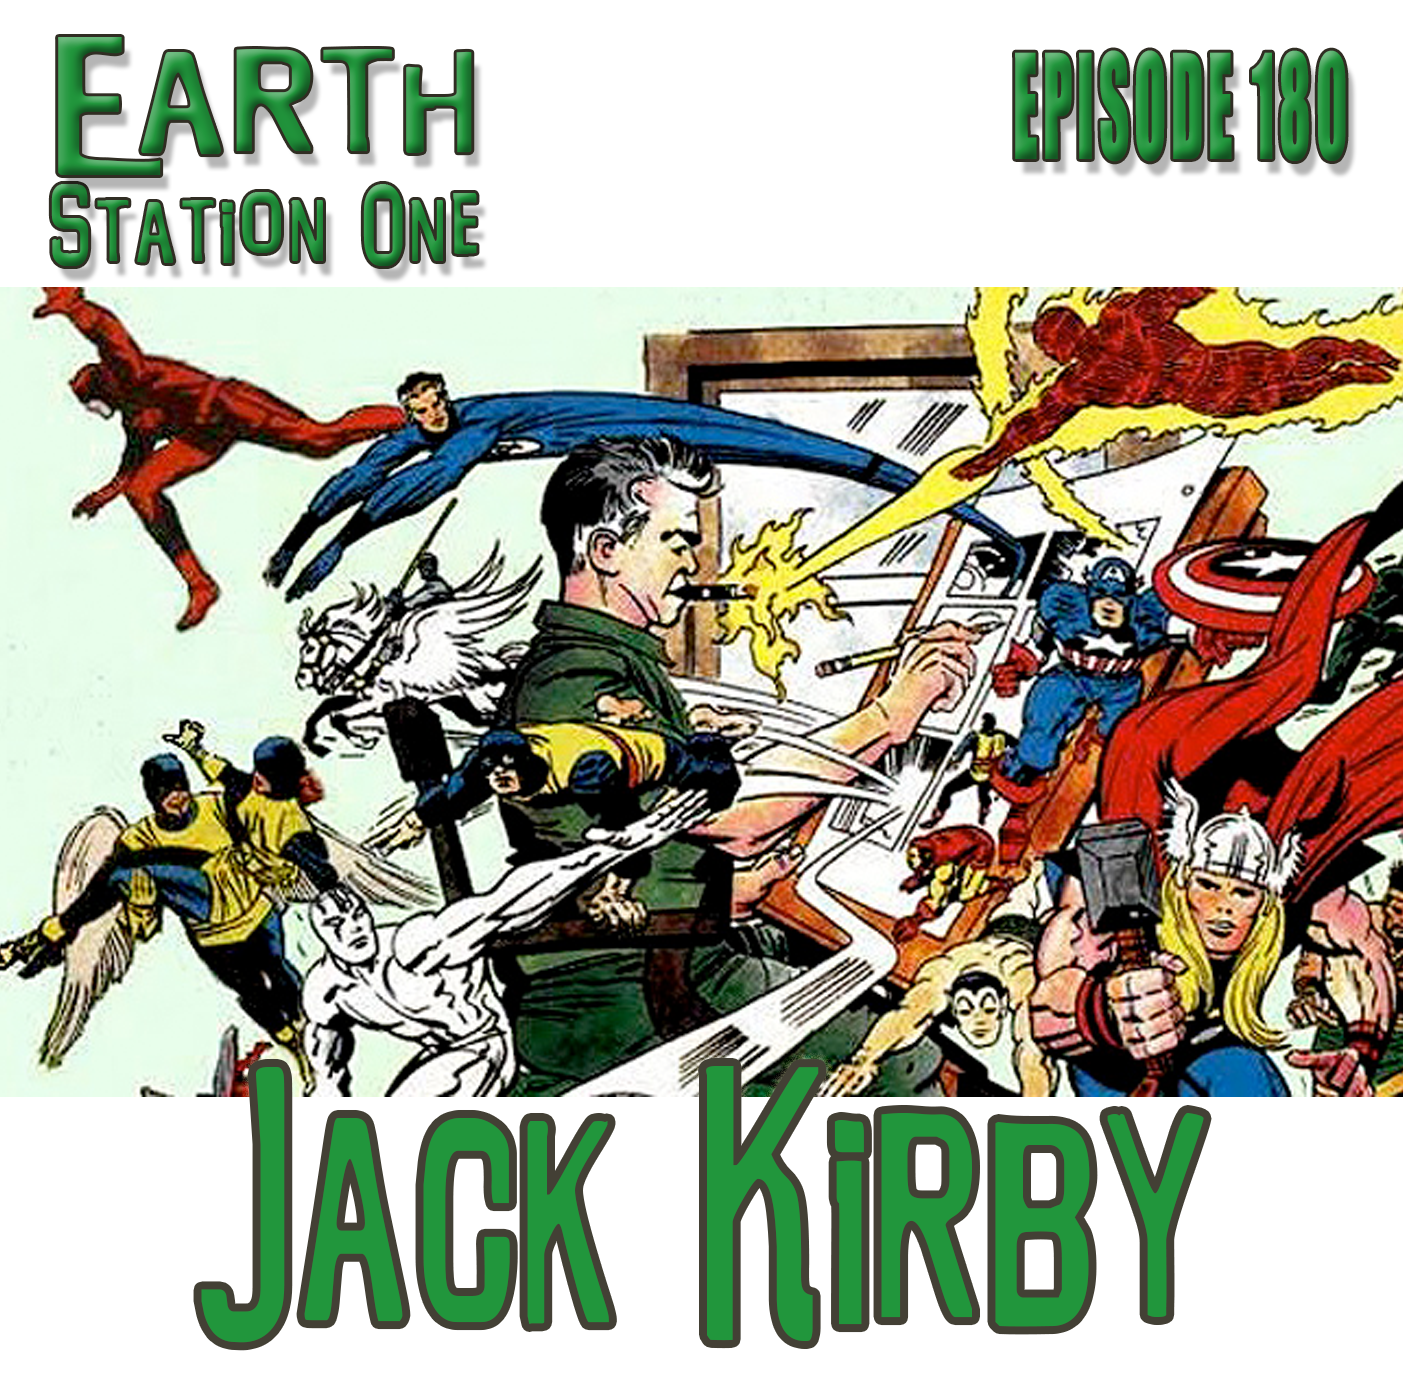 Earth Station One Episode 180 - The King of Comics Jack Kirby